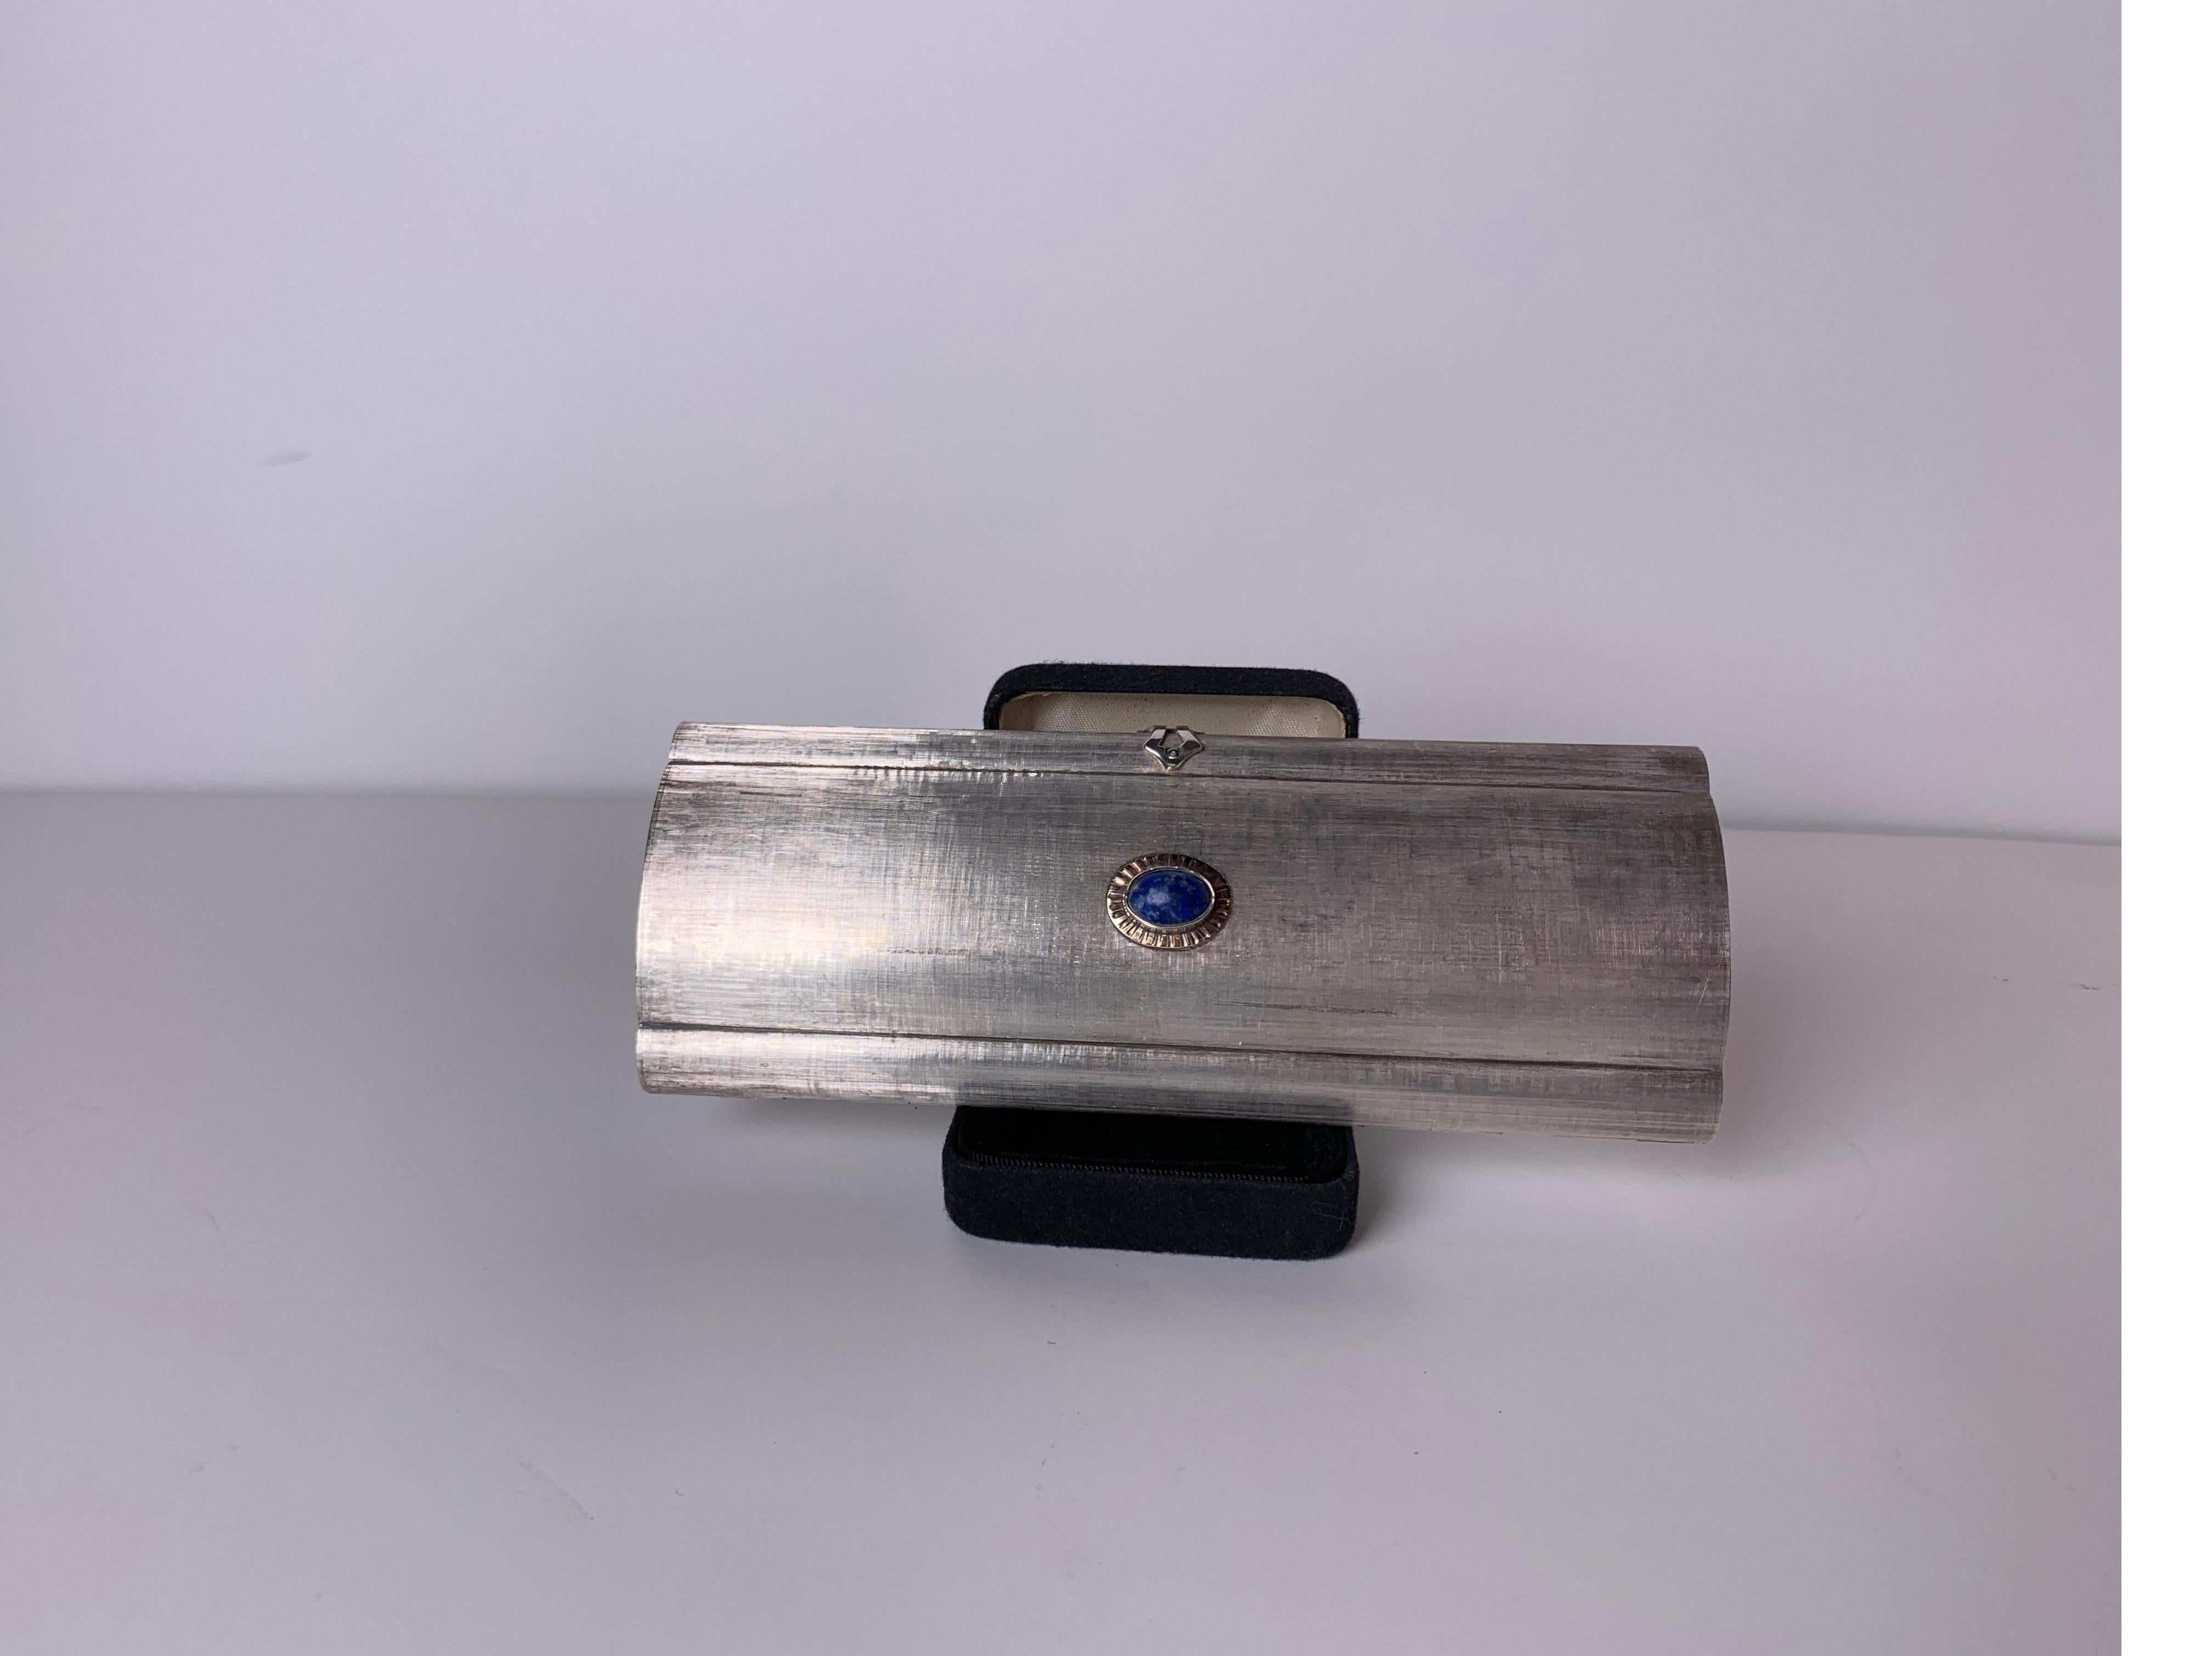 Rare and unusual high style sterling silver evening clutch with lapis. The interior is fitted with a mirror and compartments for cosmetics. The surface is a burnished satin solid sterling silver. Overall very good condition with some light spotting